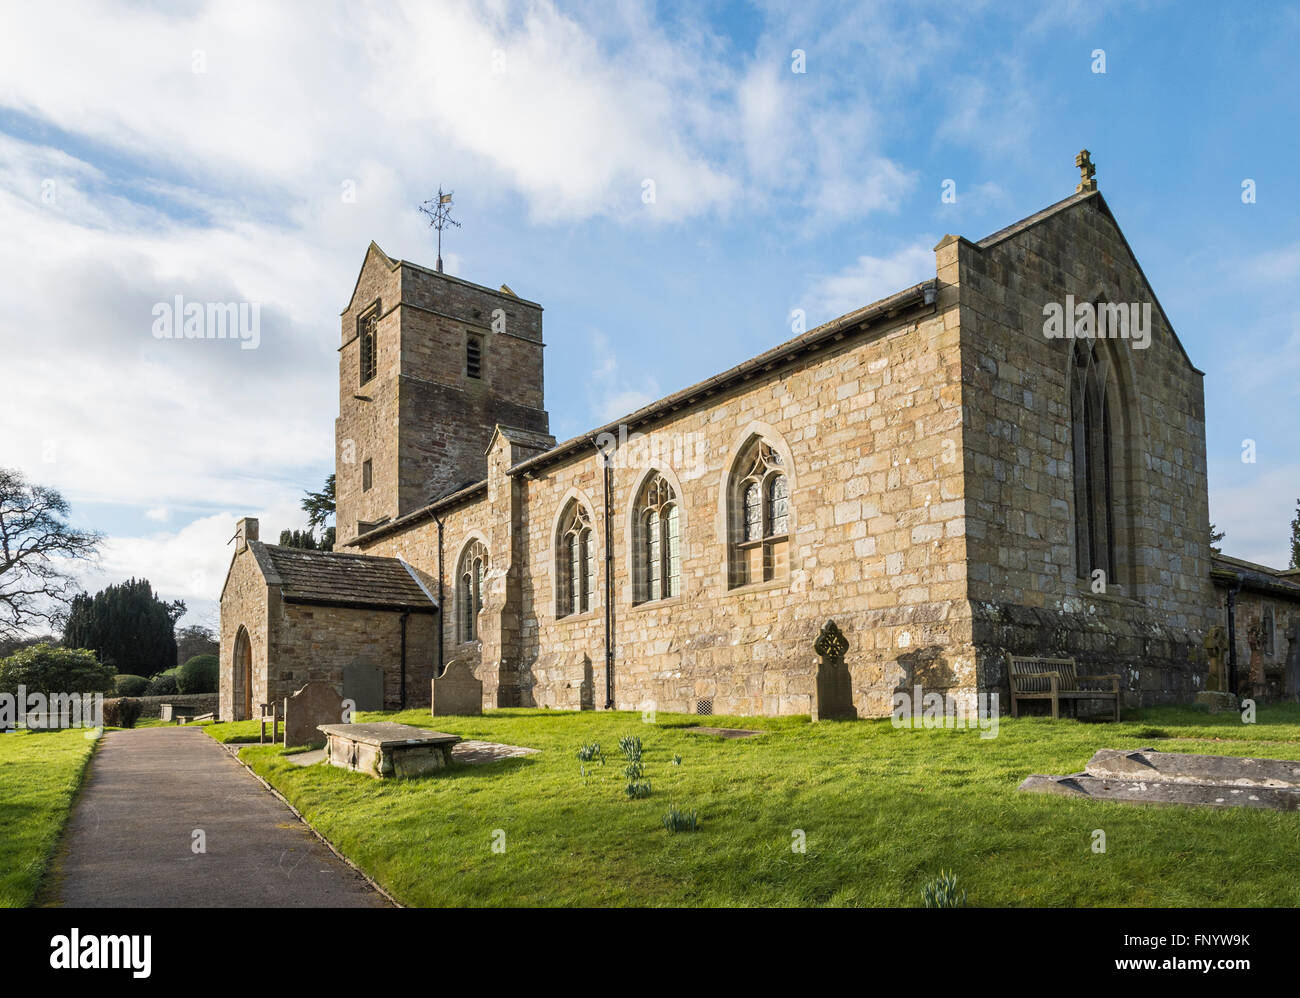 St James the Less church in the Lune valley hamlet of Tatham Stock Photo